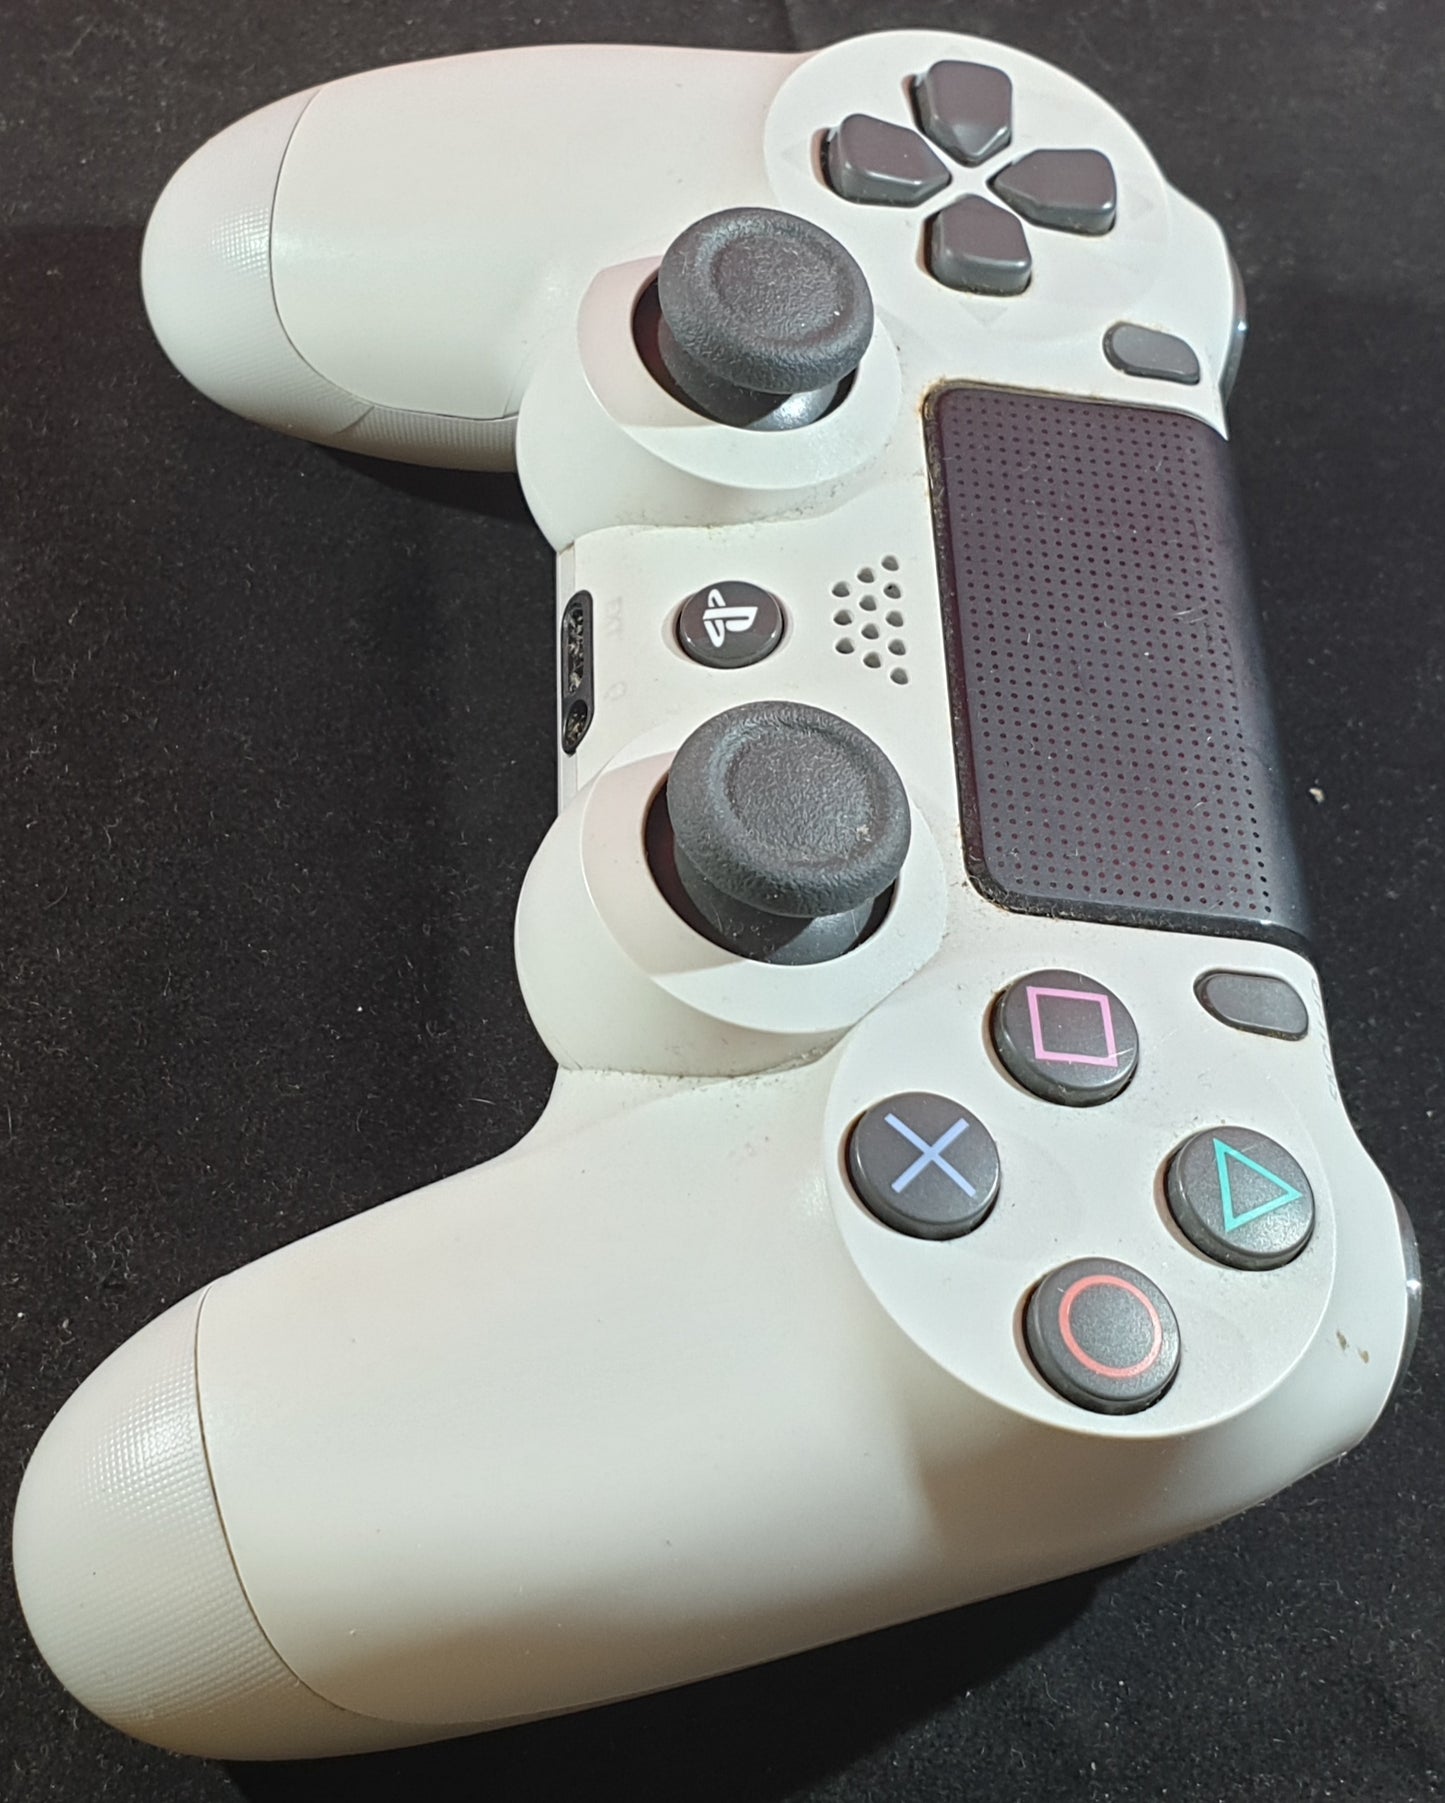 White Dualshock 4 Official Controller Sony Playstation 4 (PS4) Accessory